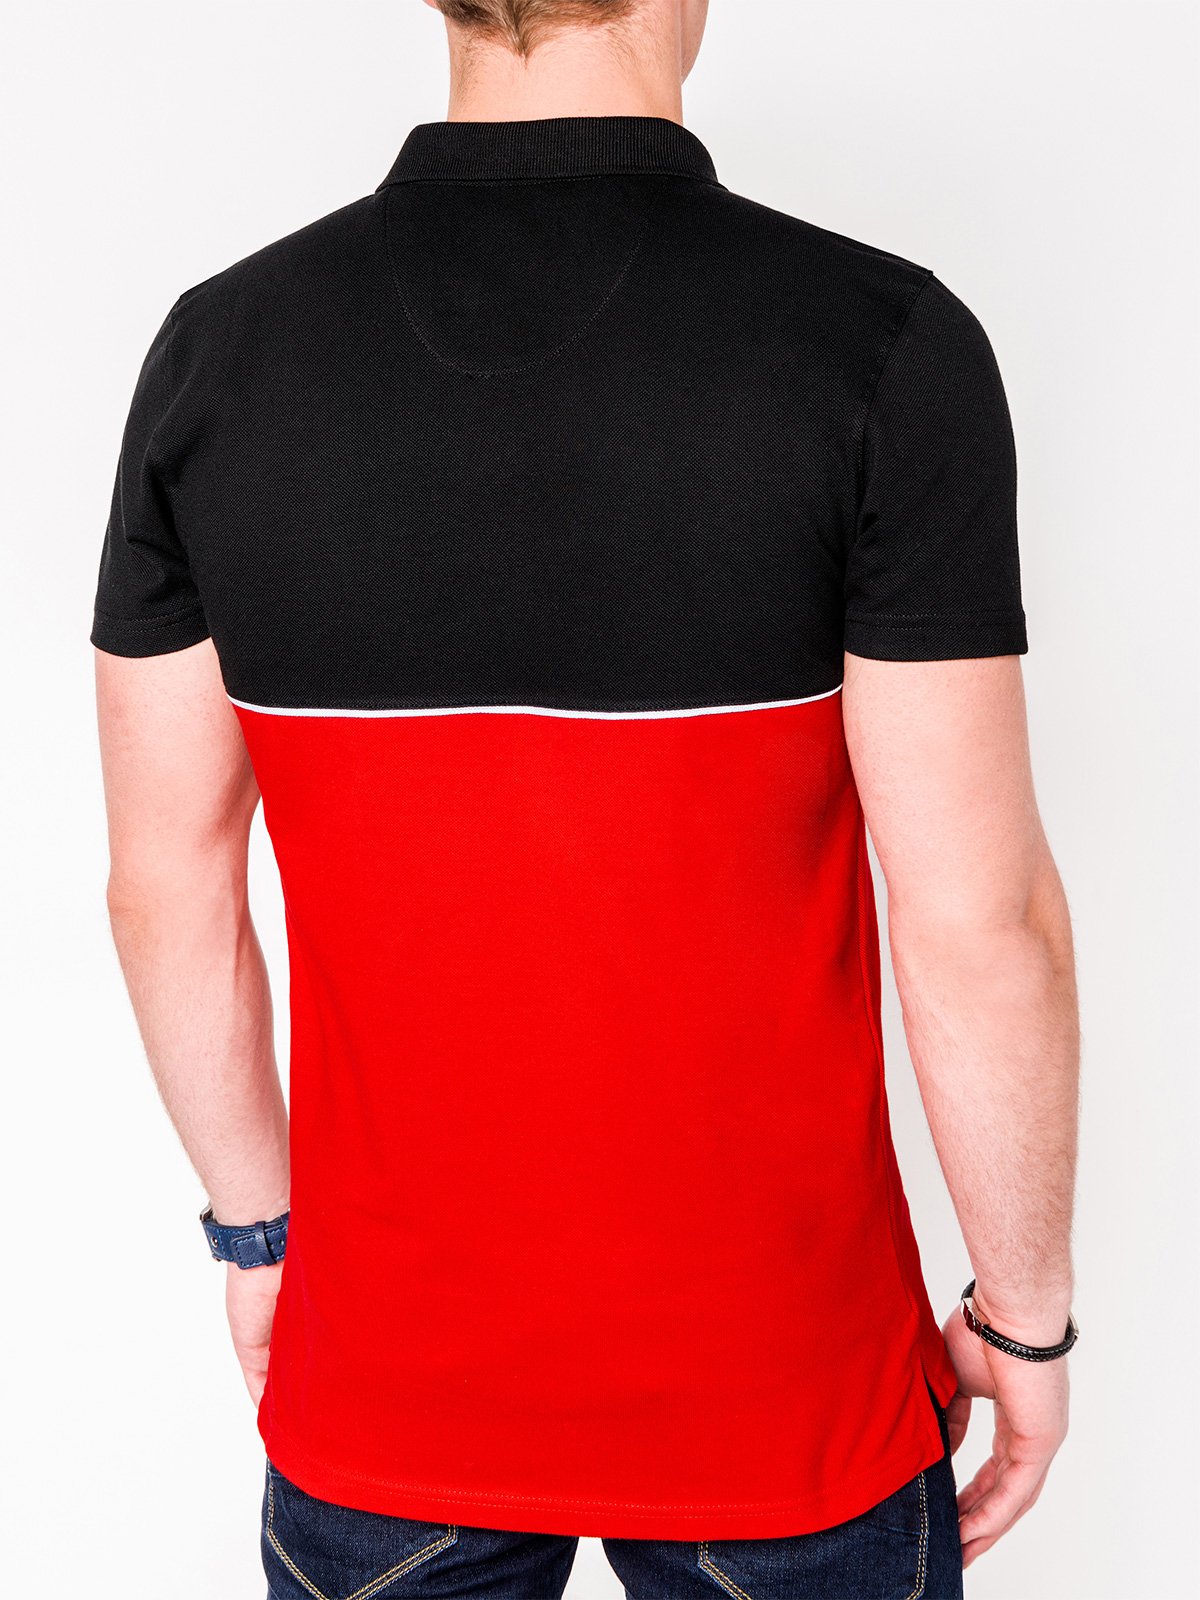 black polo shirt with red